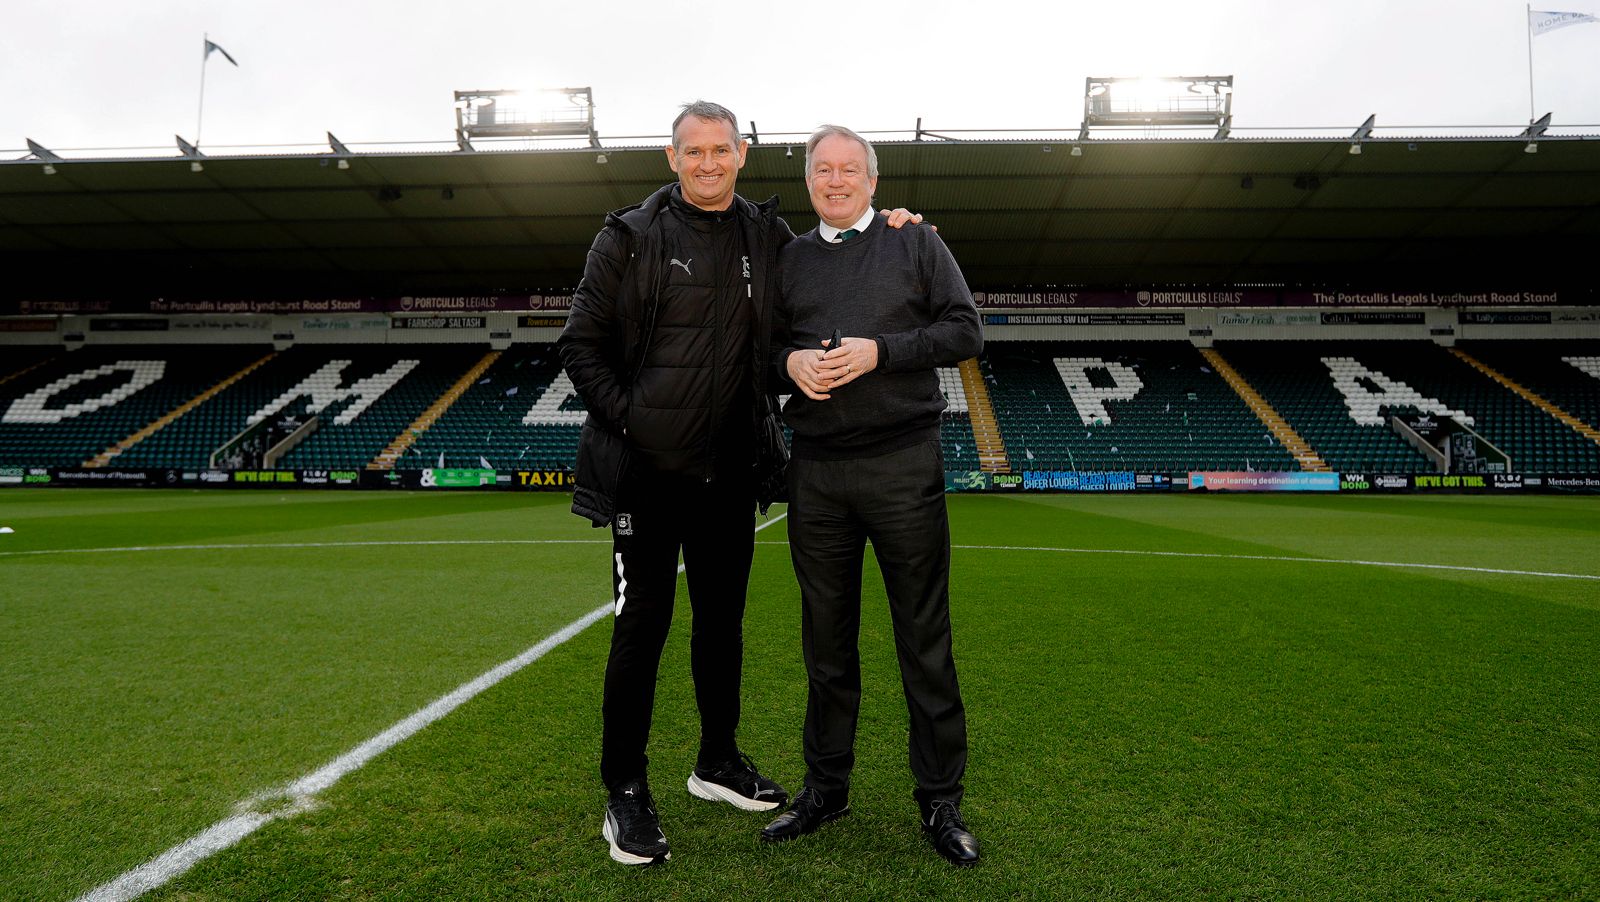 Kevin Nancekivell and Neil Dewsnip on the pitch at Home Park